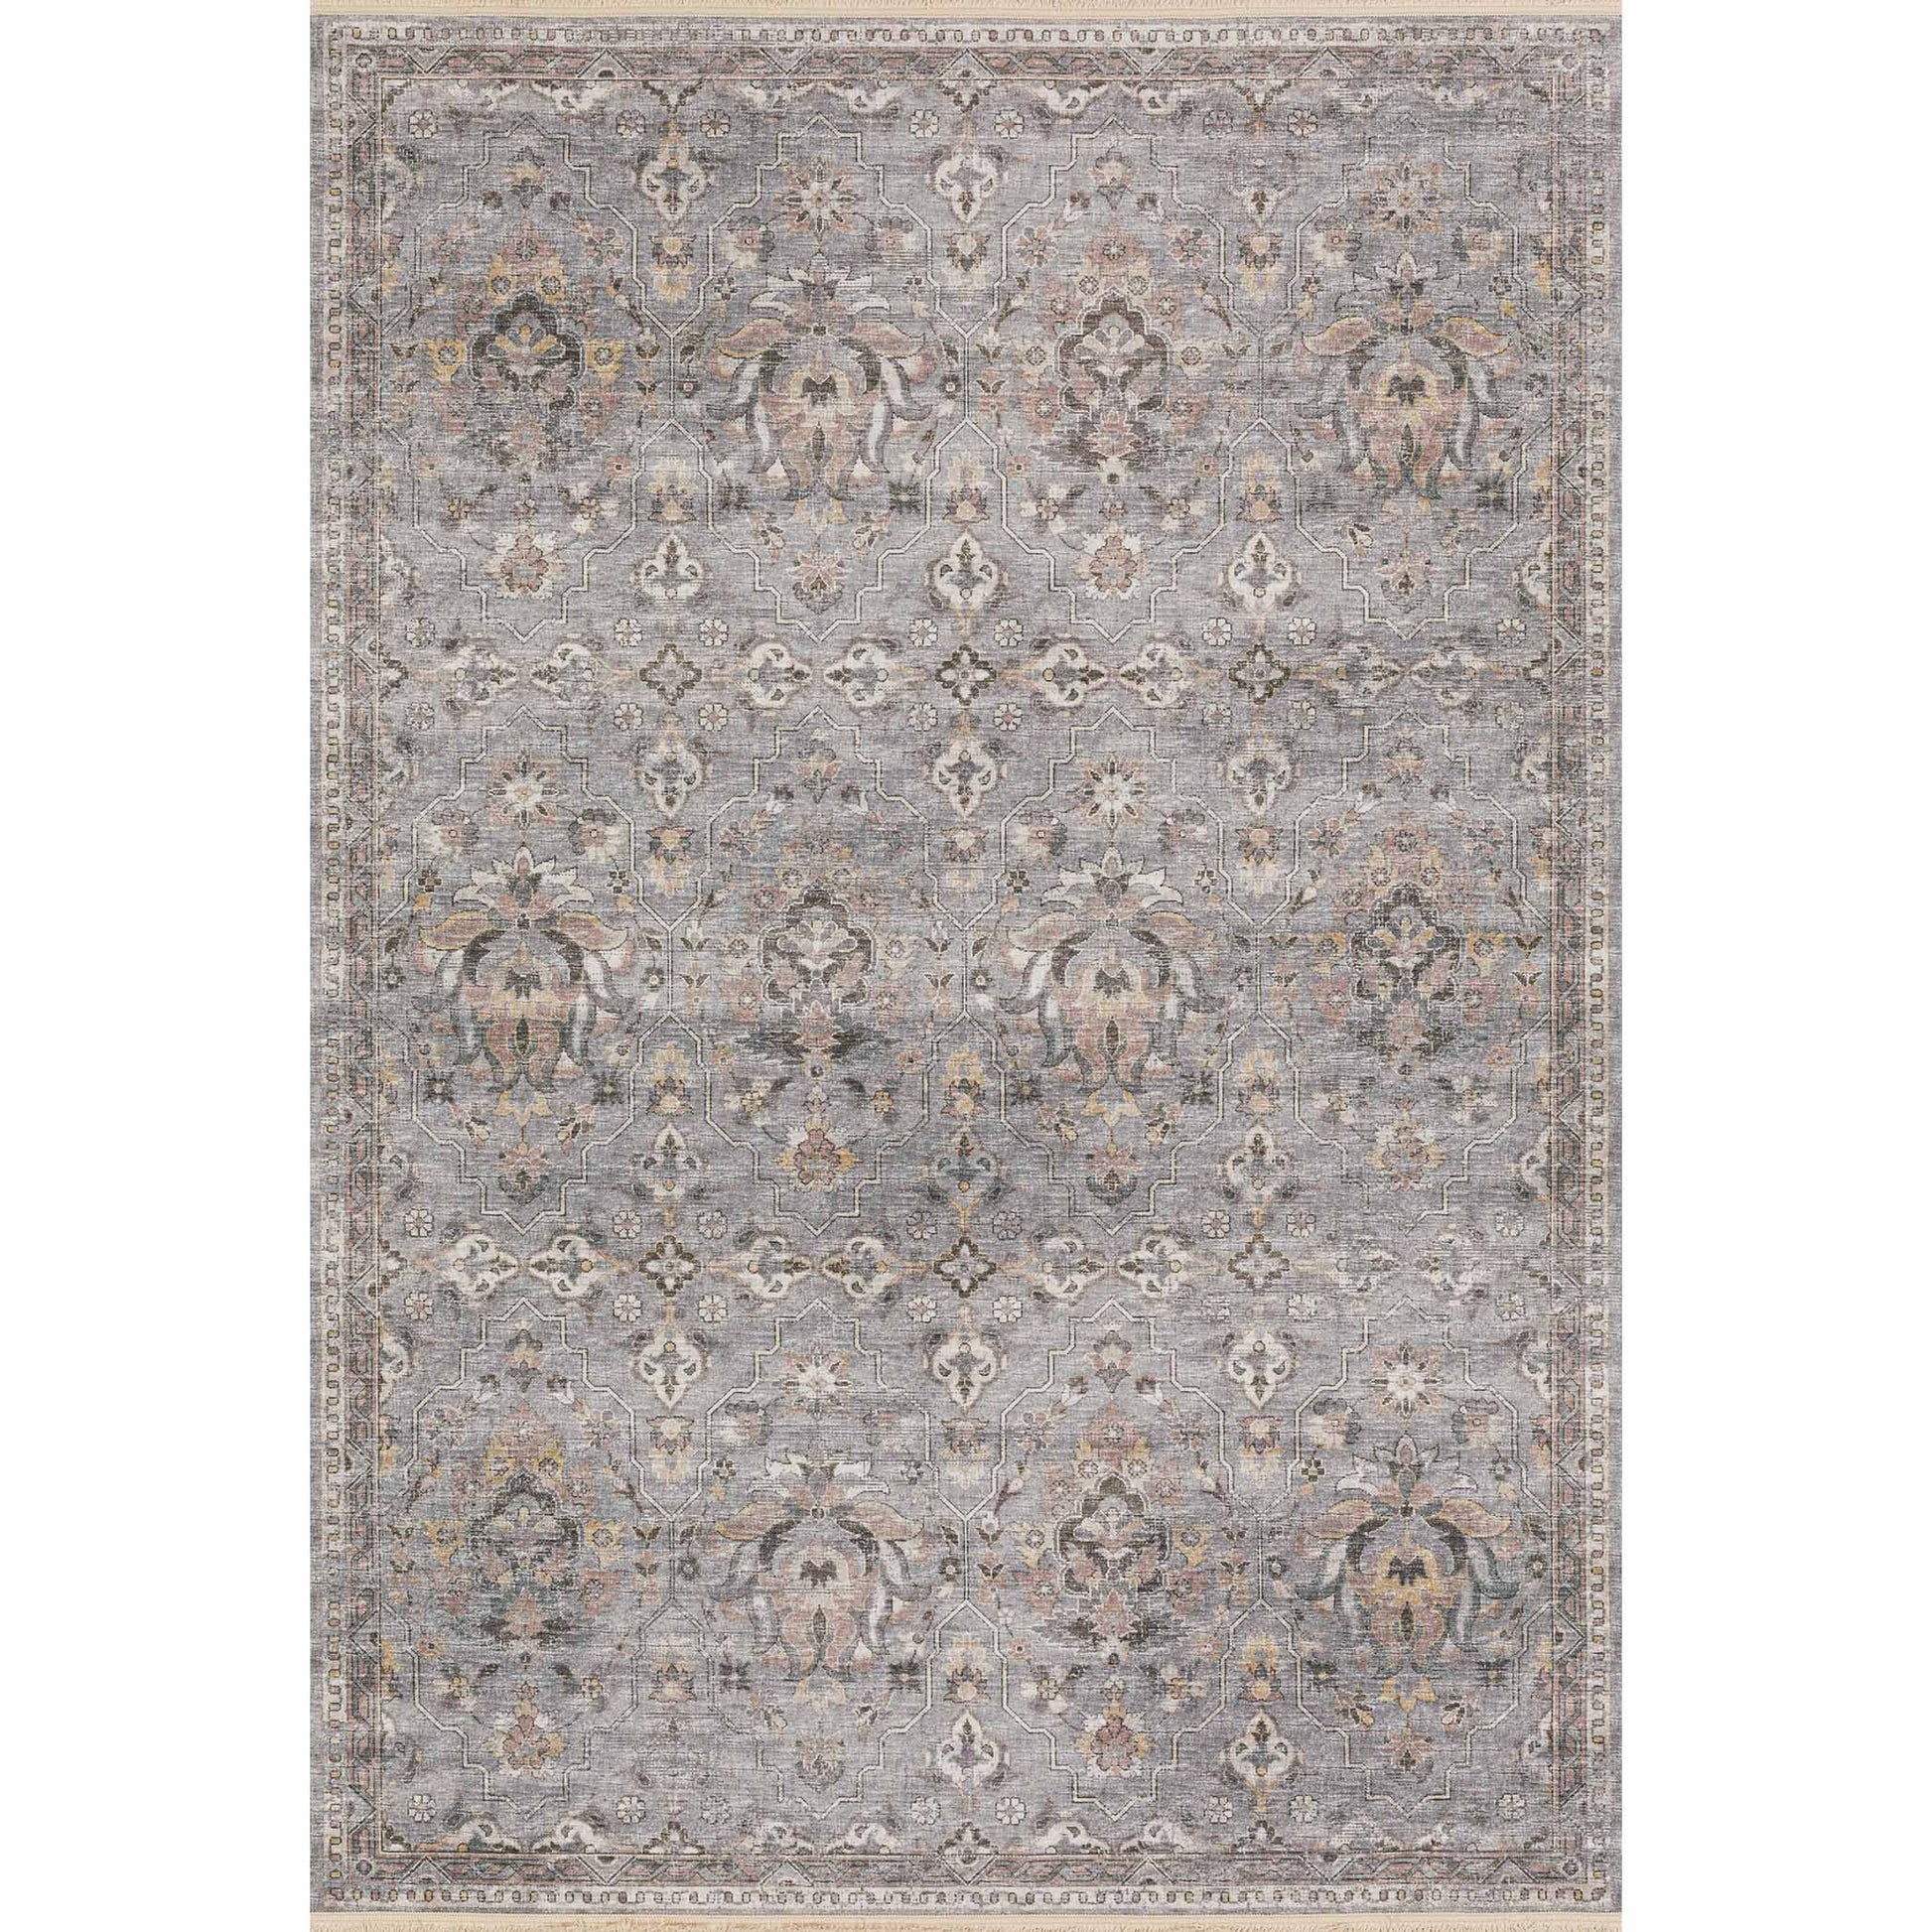 Dalyn Rugs Marbella MB4 Silver Traditional Machinemade Rug